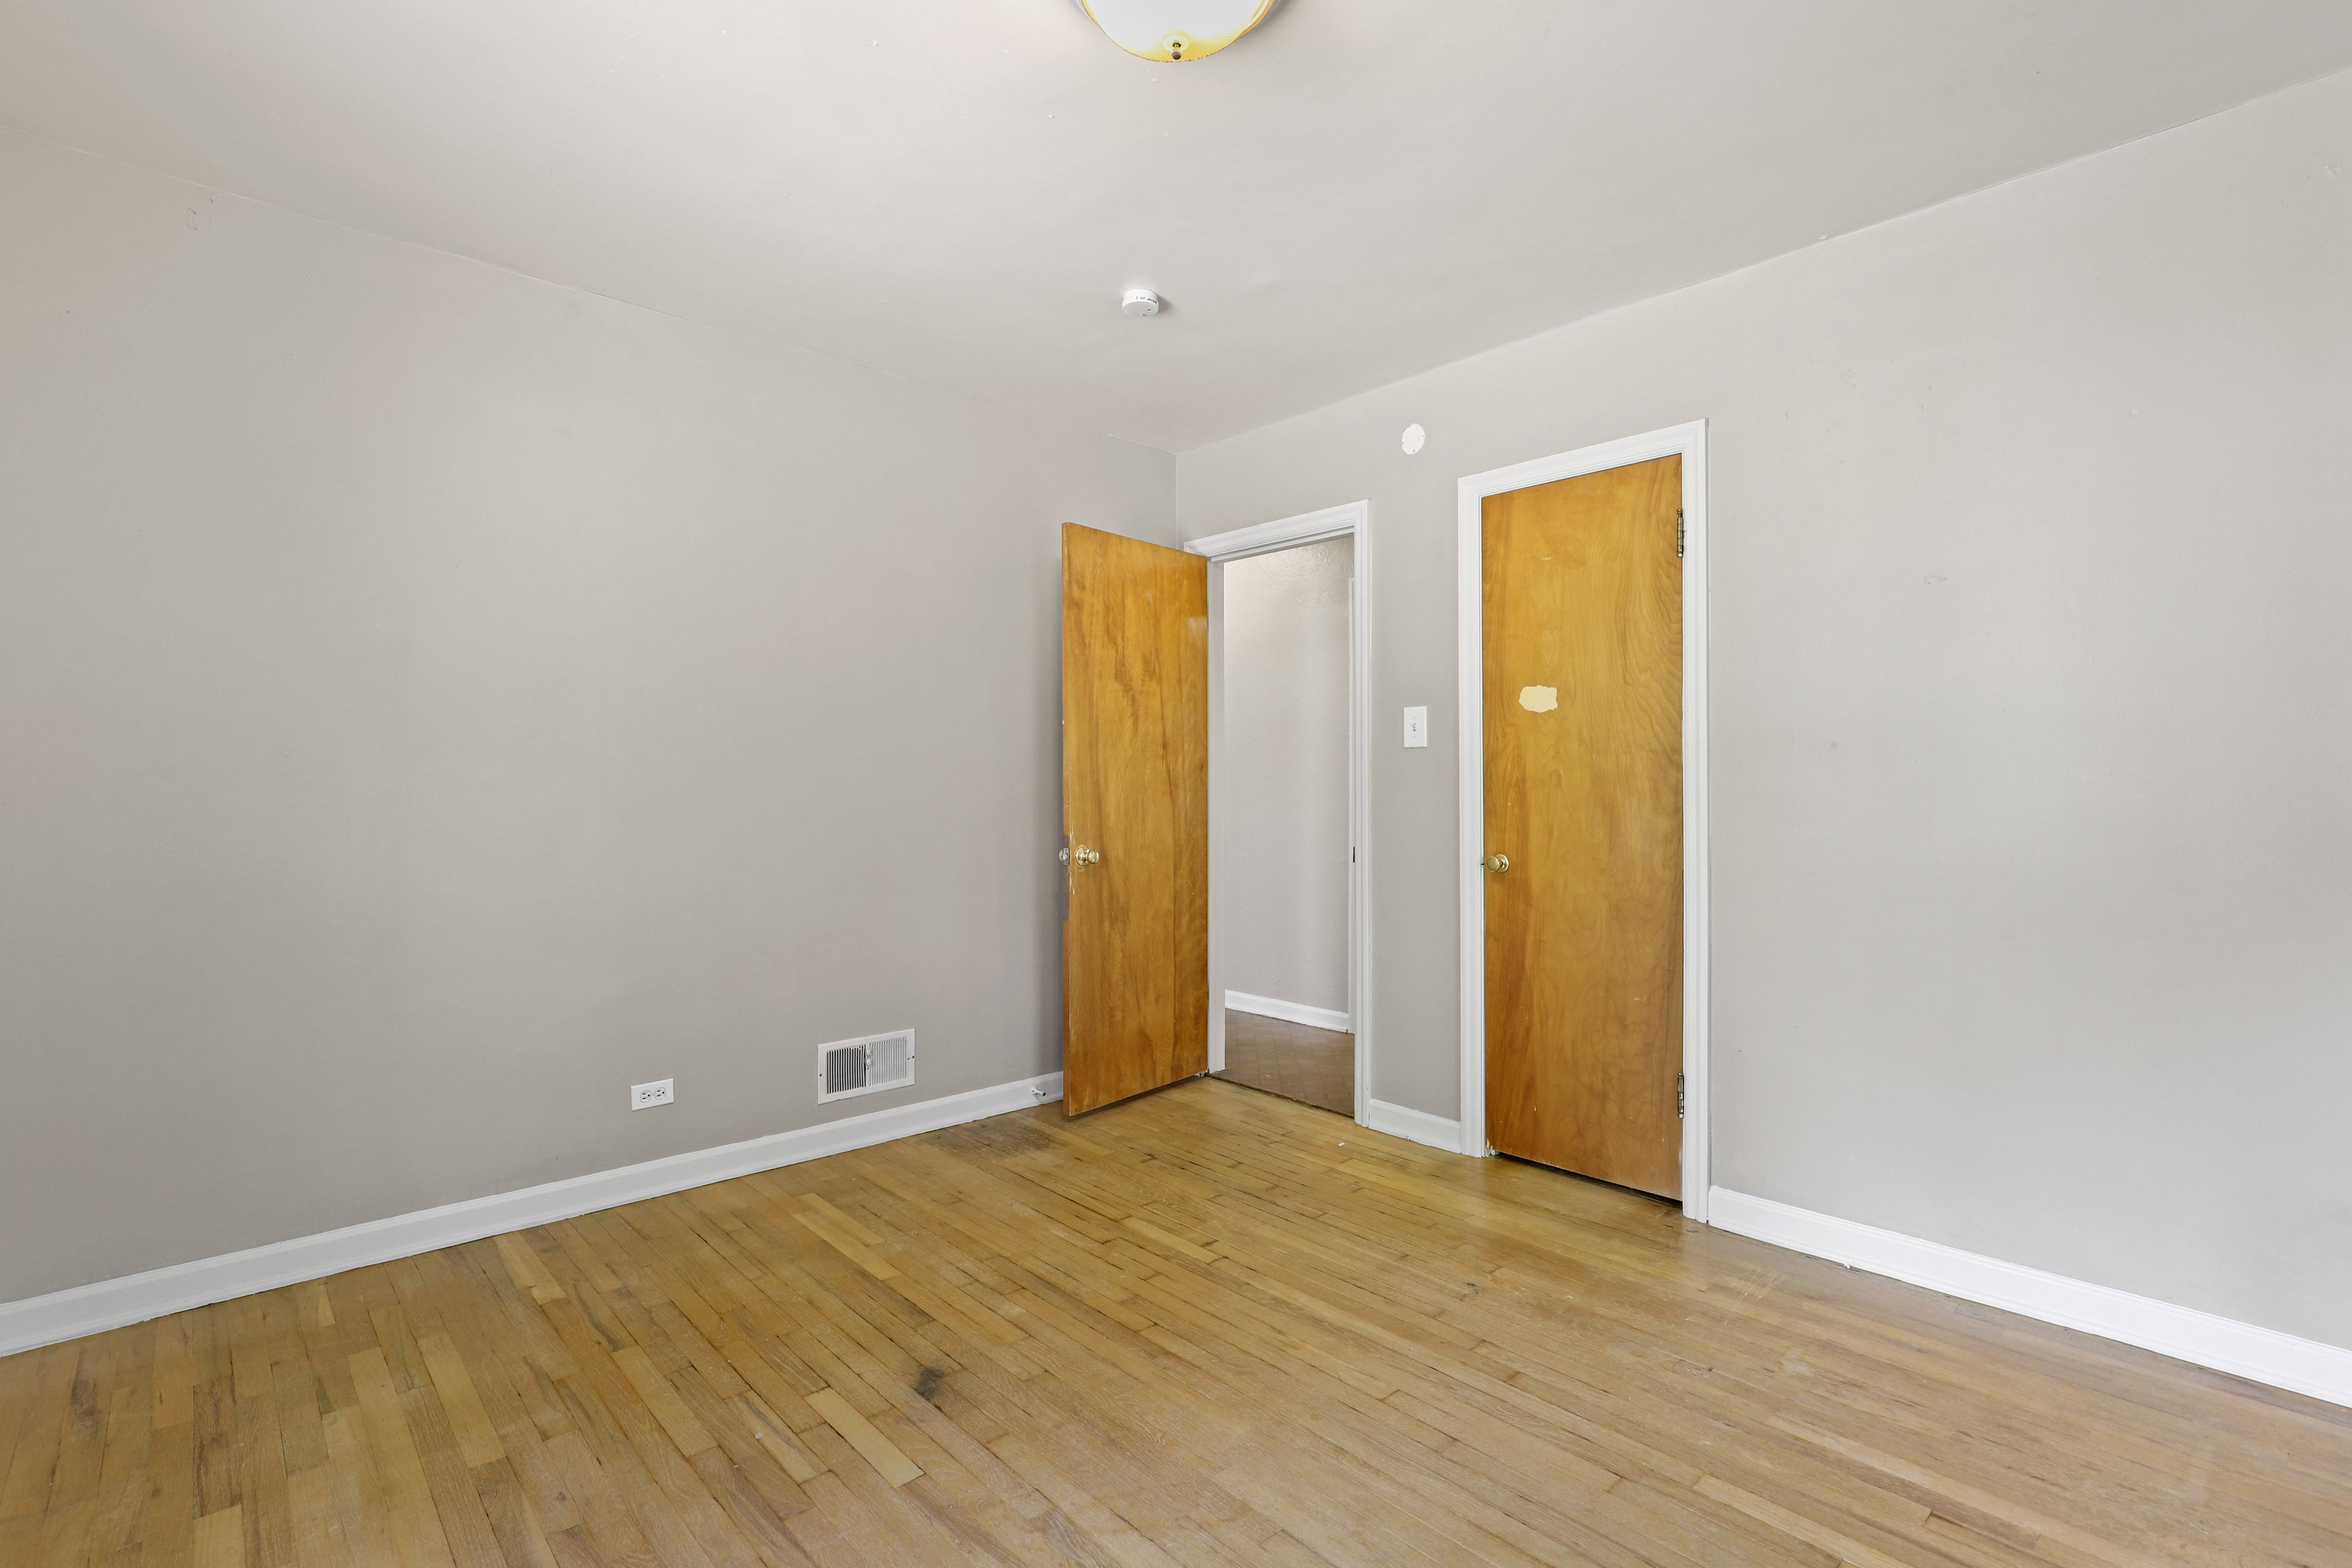 a empty room with a wooden floor and two doors